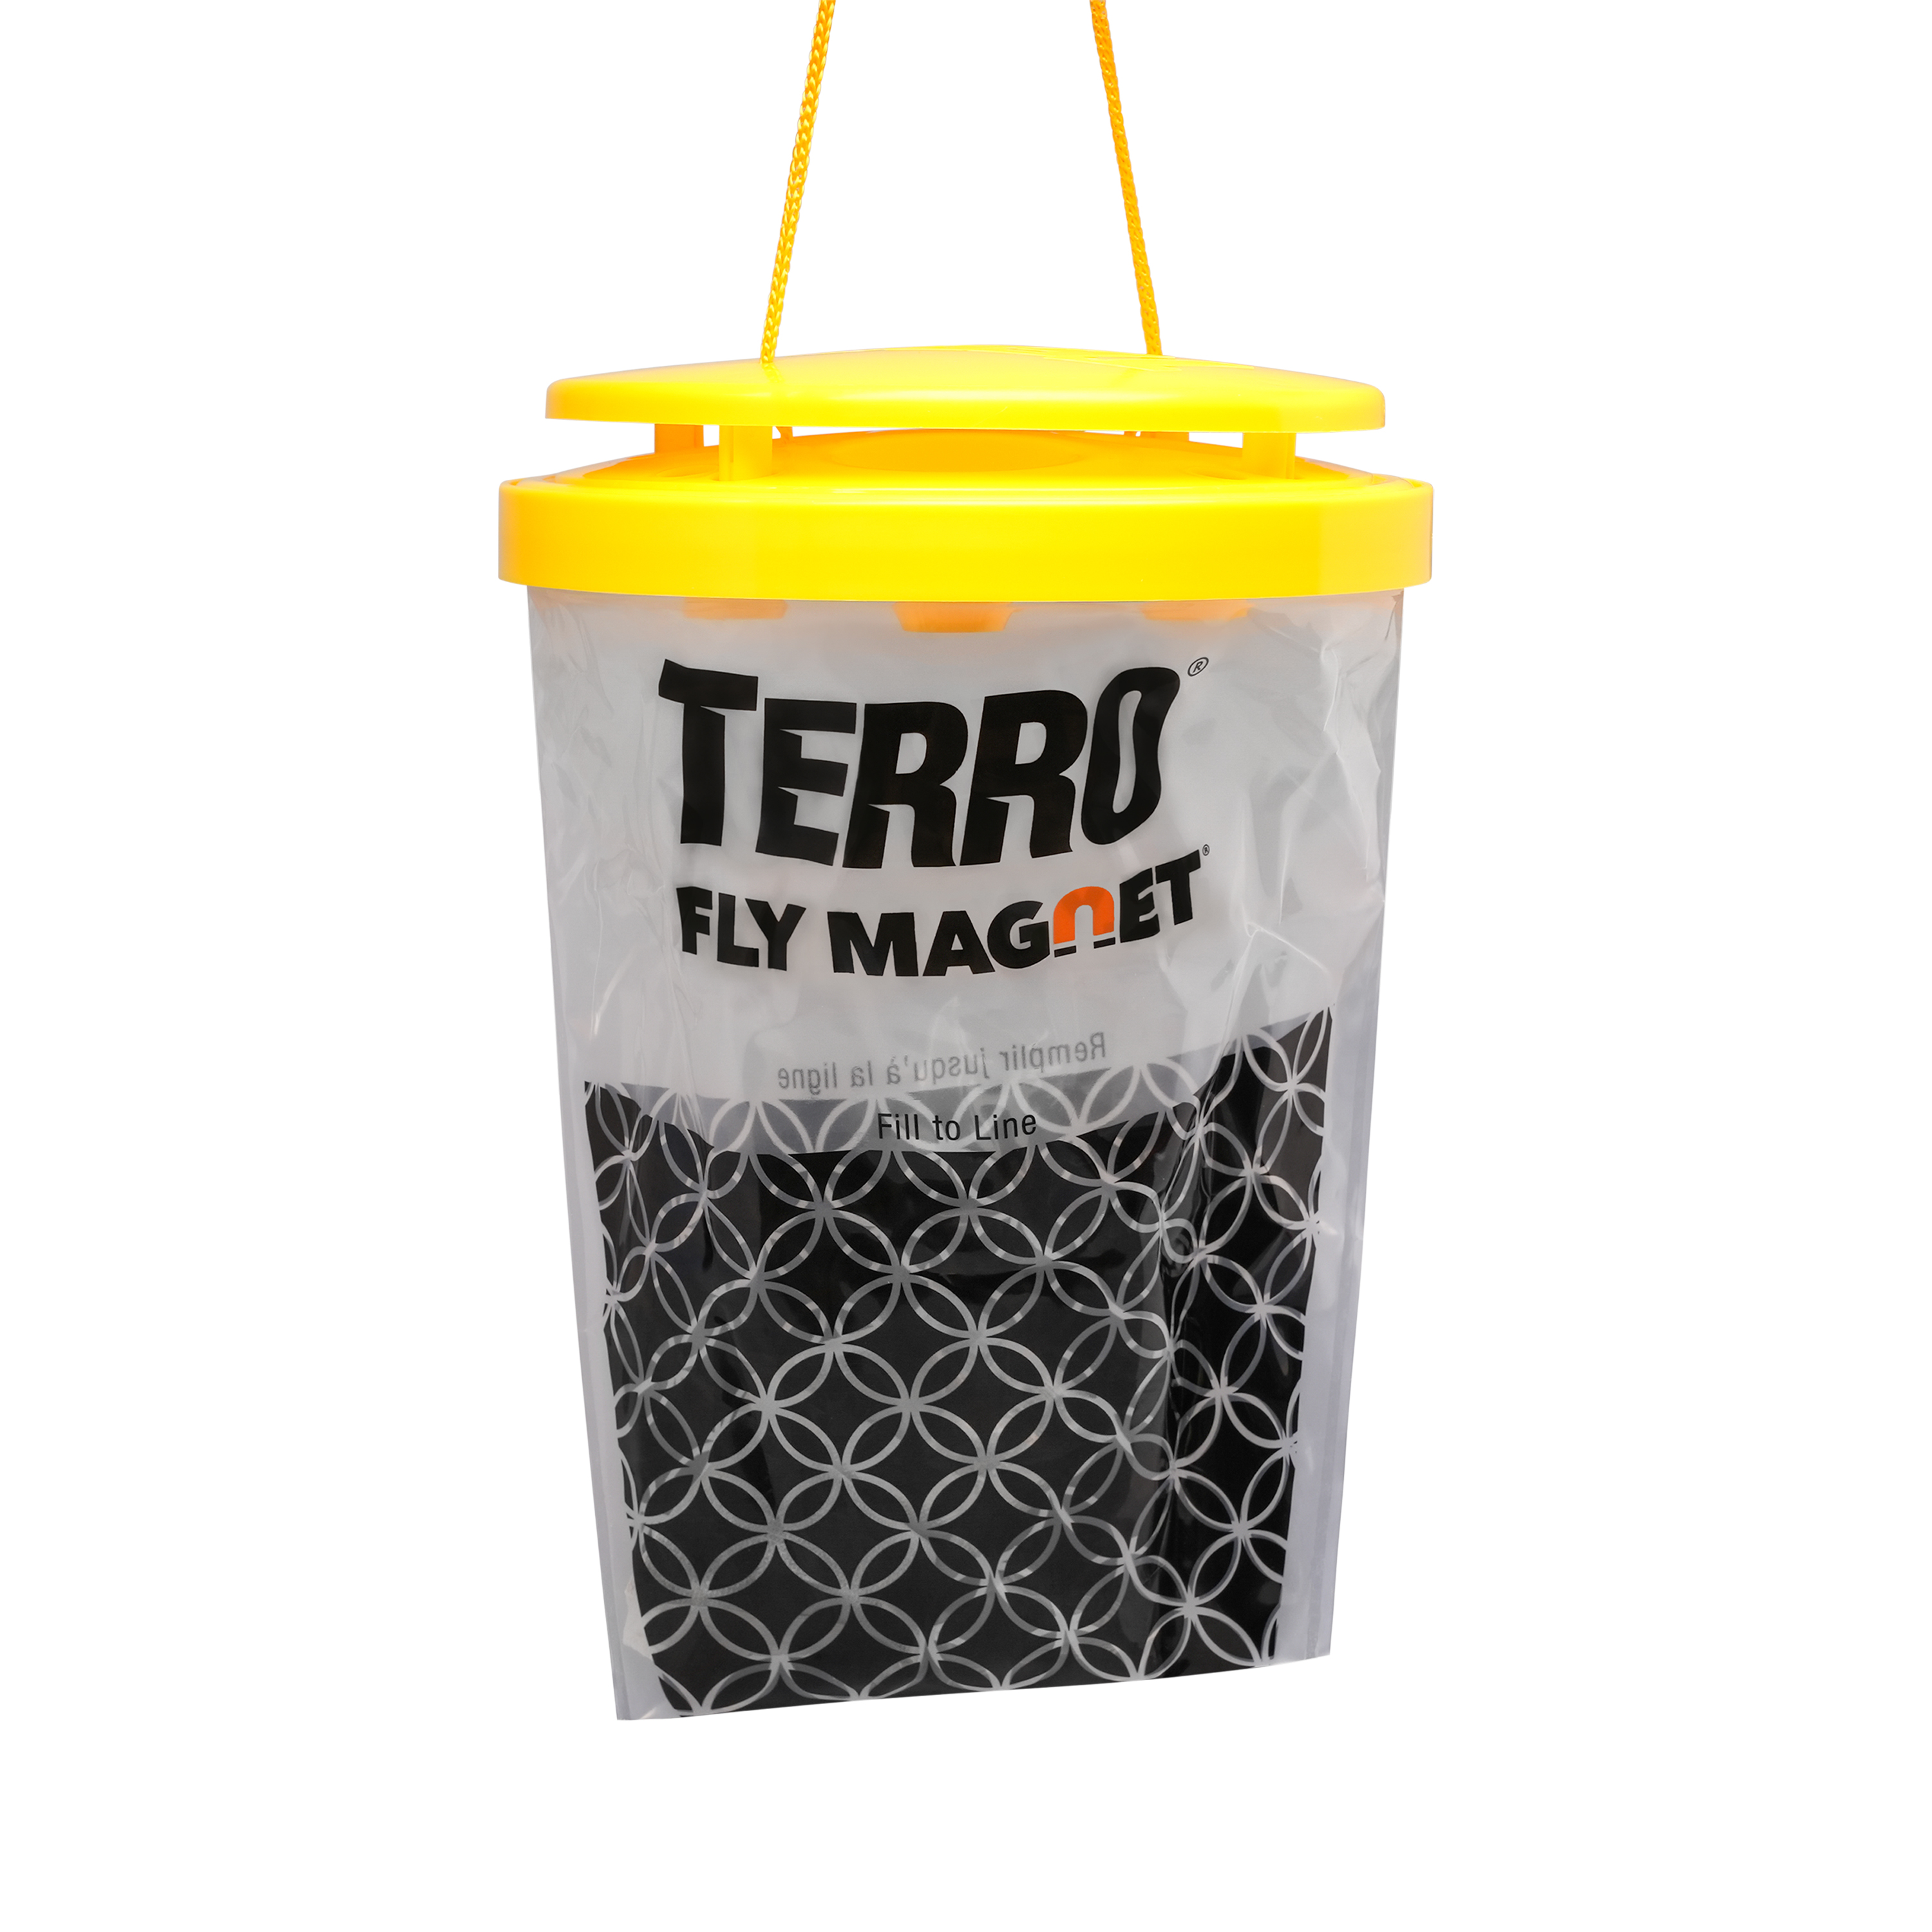 Terro Fly Magnet Disposable Fly Trap - image 1 of 3